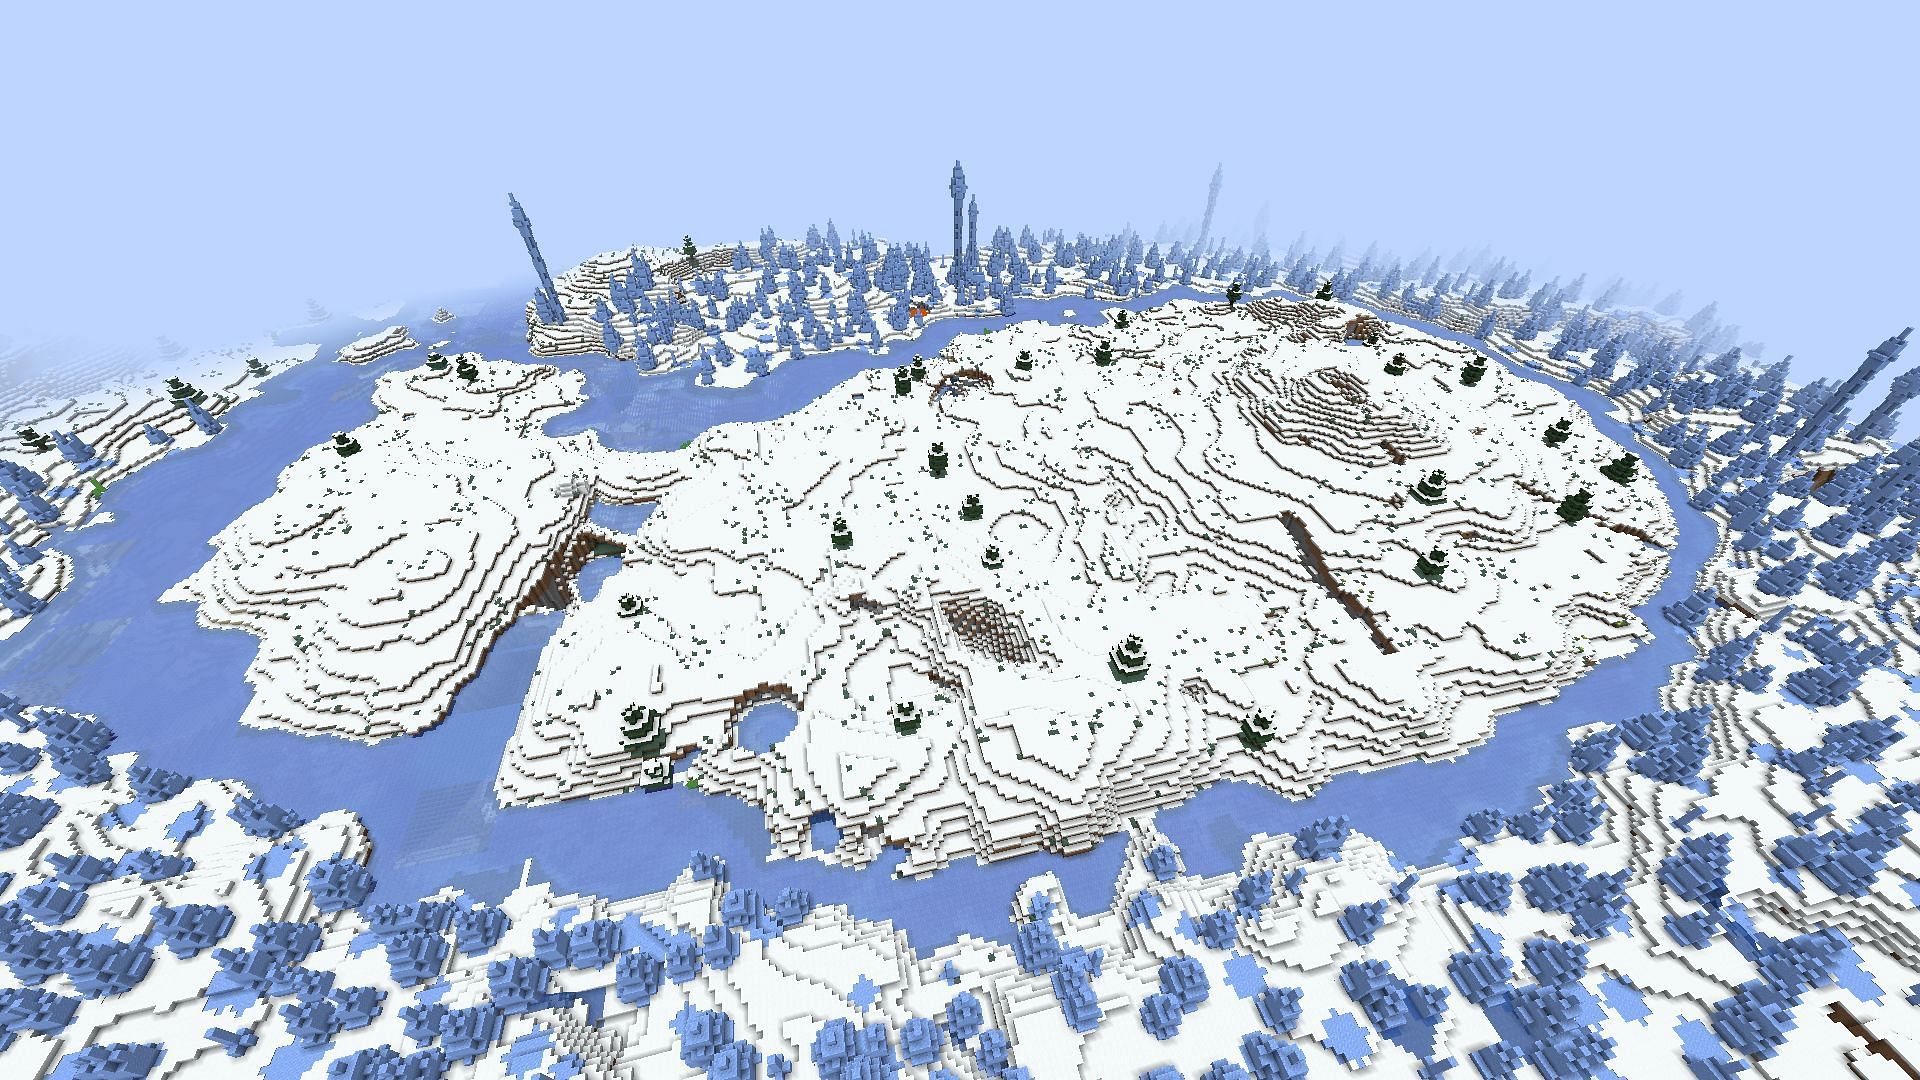 The snowy plains, surrounded by a field of ice spikes (Image via Minecraft)